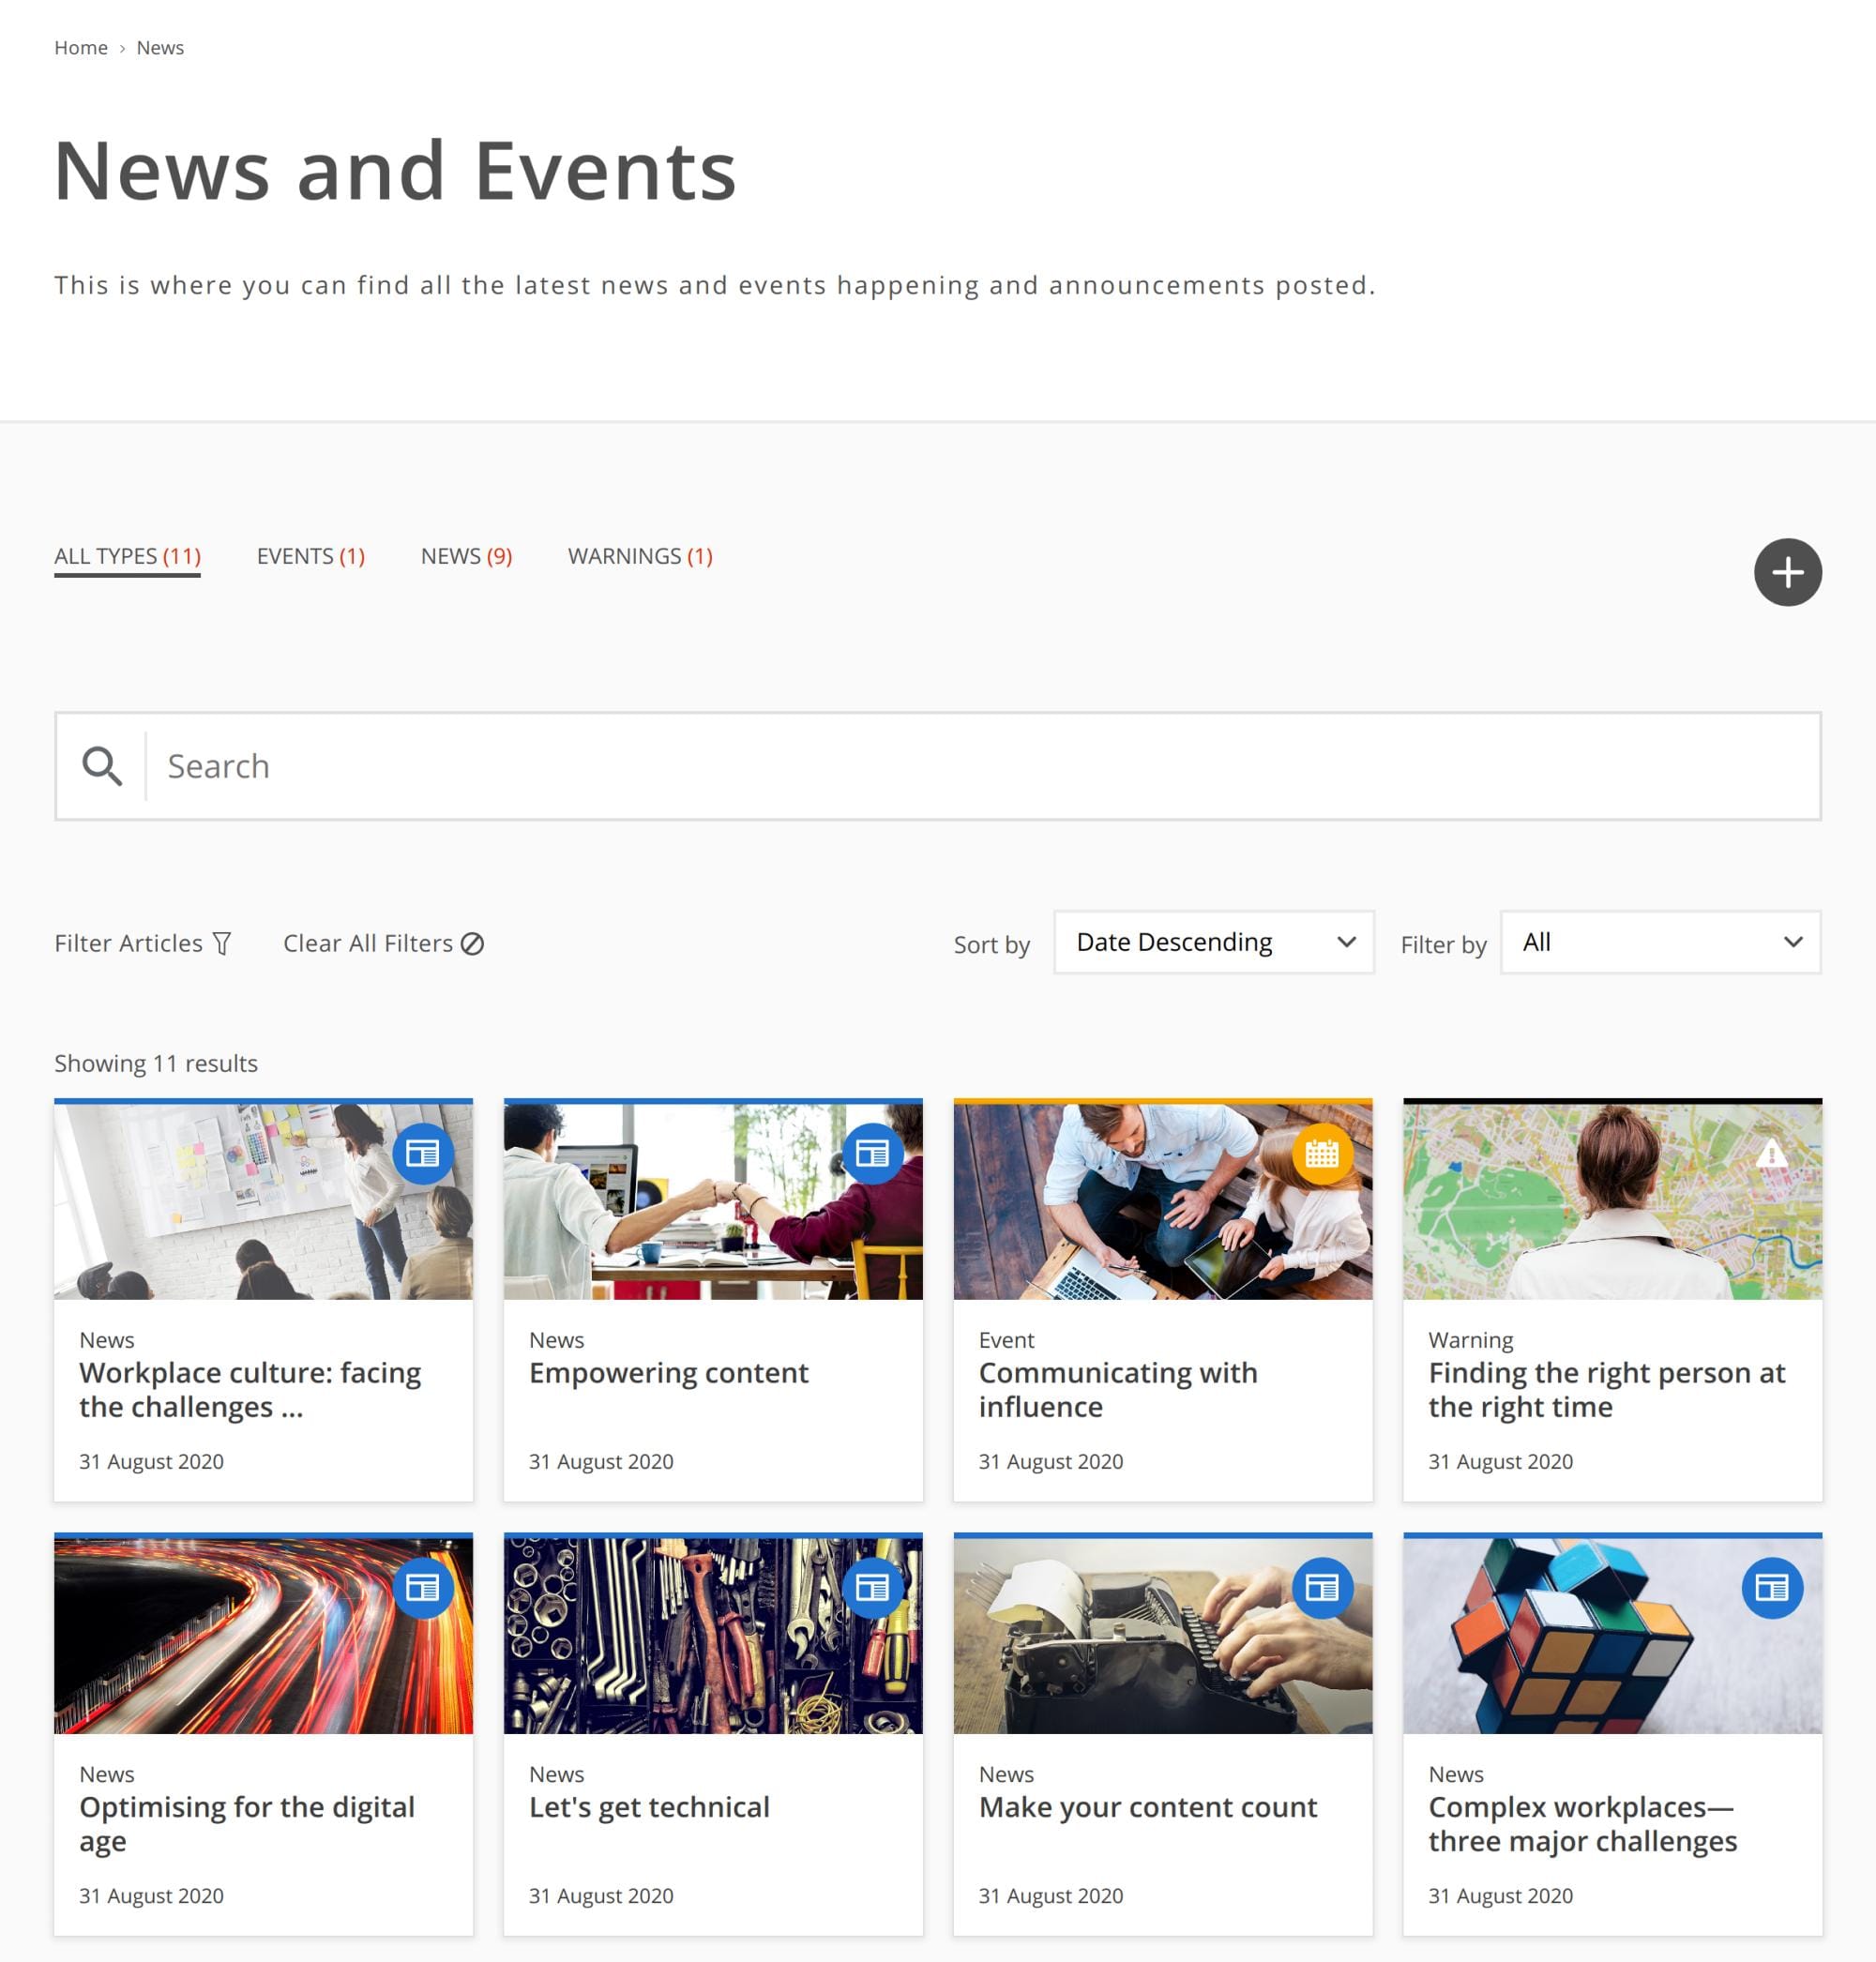 News and events page